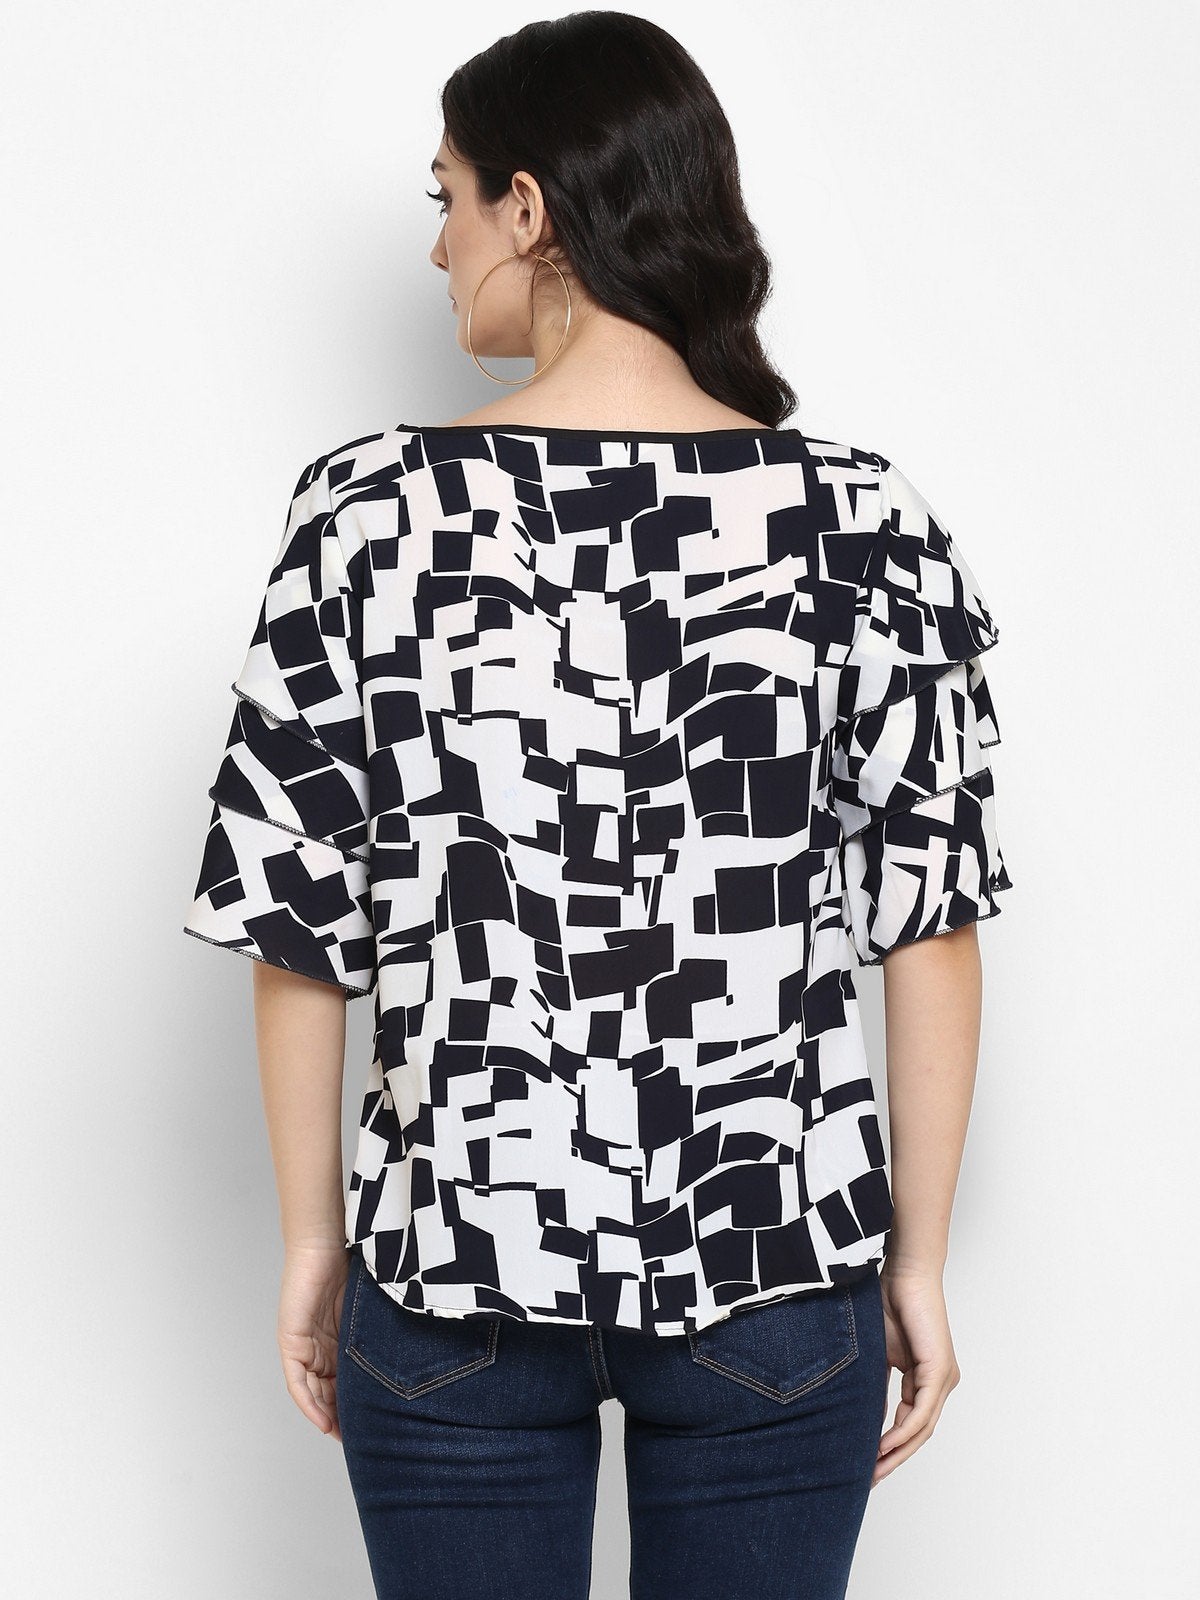 Women's Abstract Printed Triple Flared Sleeves Top - Pannkh